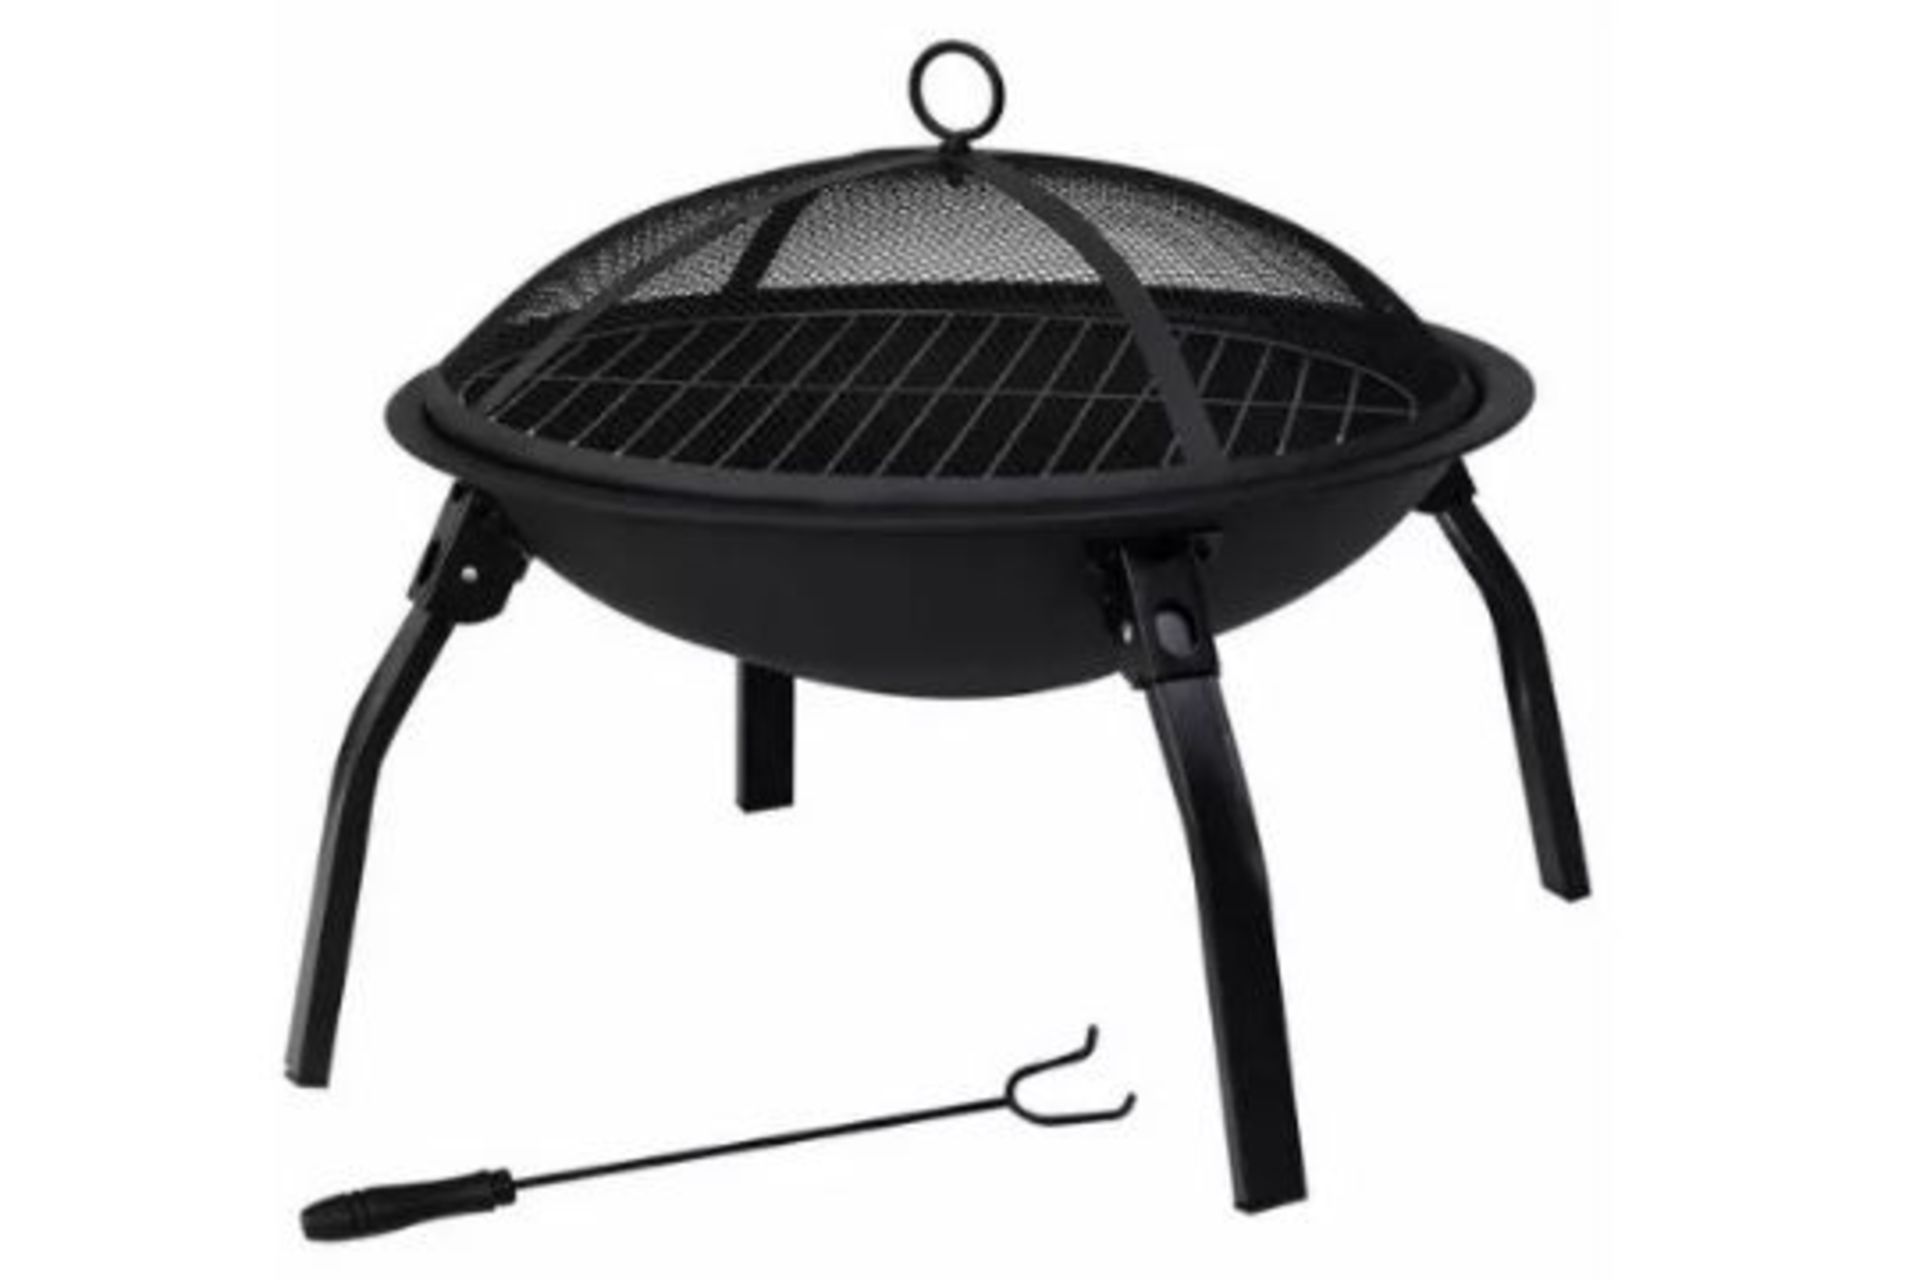 New Boxed Portable Folding Fire Pit BBQ 4 Leg Fire bowl Cooking Campfire. RRP £119.99. This - Image 2 of 3